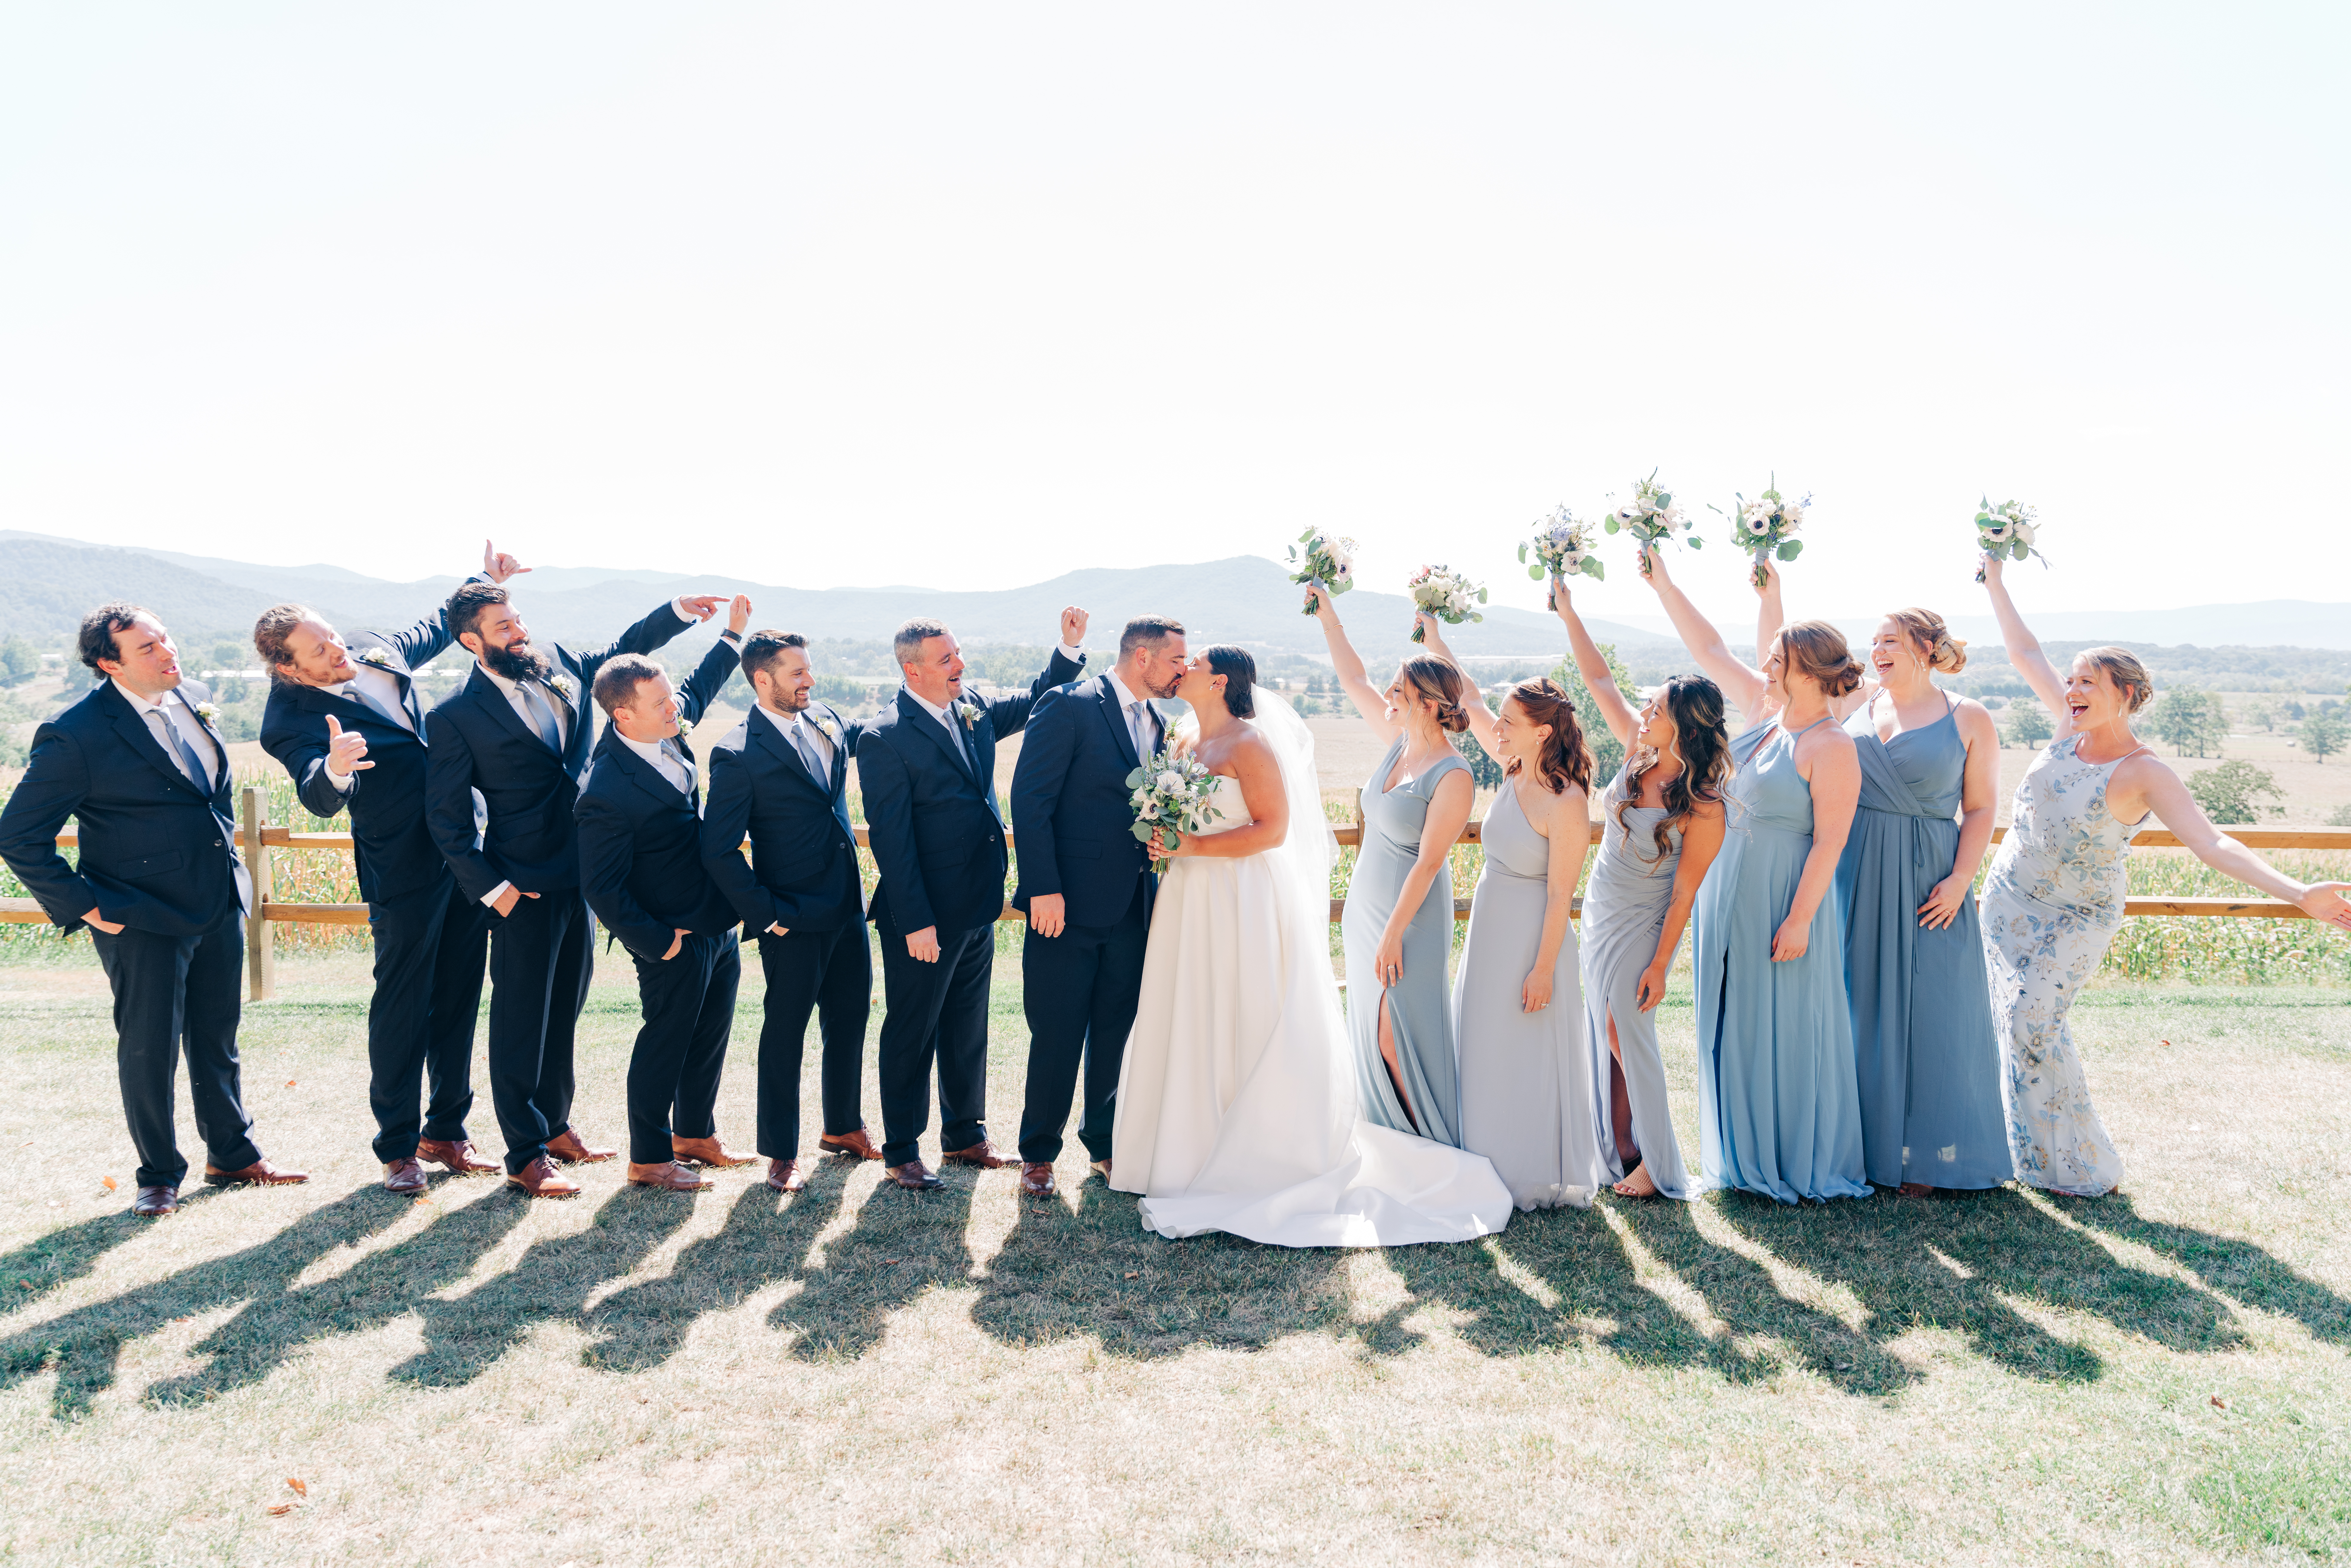 Wedding party in the Shenandoah Woods by Virginia Wedding Company